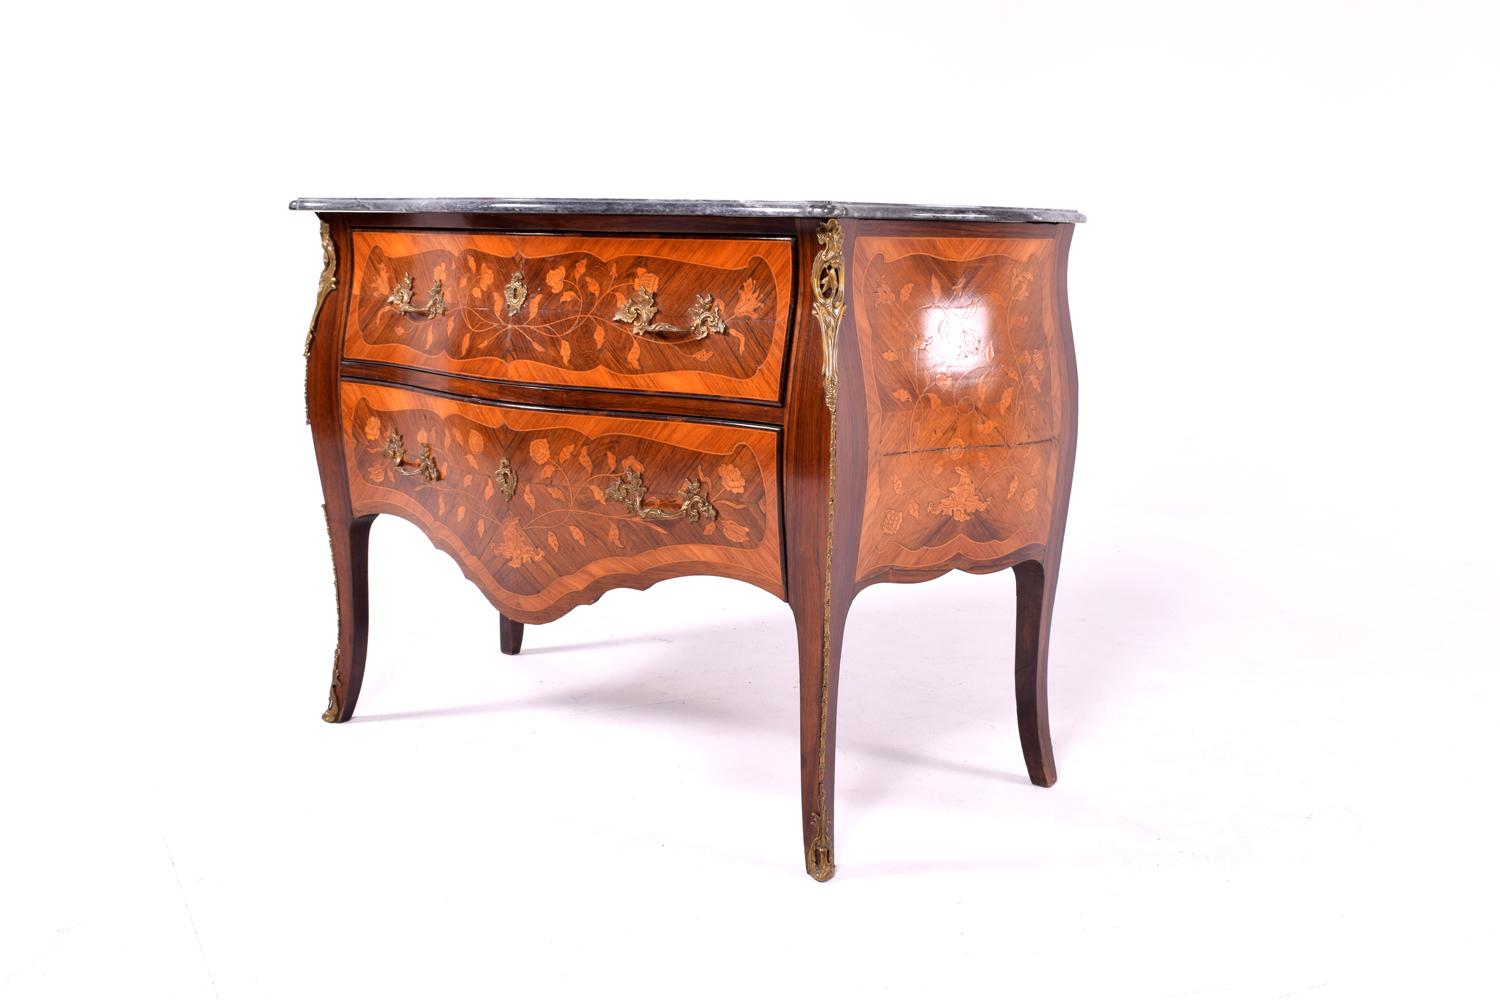 A fine quality early 20th century Swedish marble topped and bronze mounted marquetry bombe commode. This stunning decorative and richly hued commode is accented with a magnificent marble top and original bronze mounts and features rosewood and